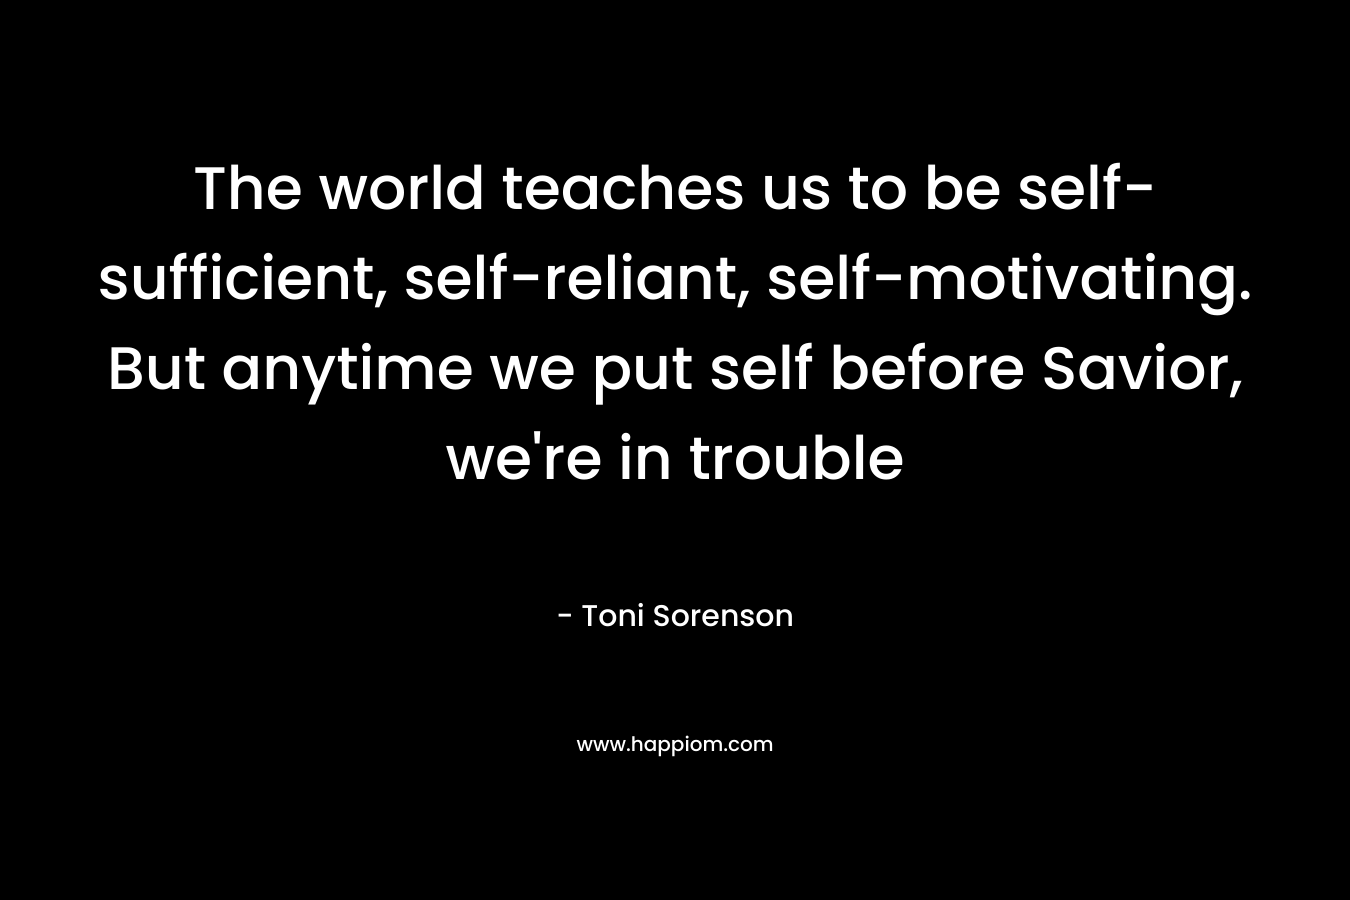 The world teaches us to be self-sufficient, self-reliant, self-motivating. But anytime we put self before Savior, we're in trouble